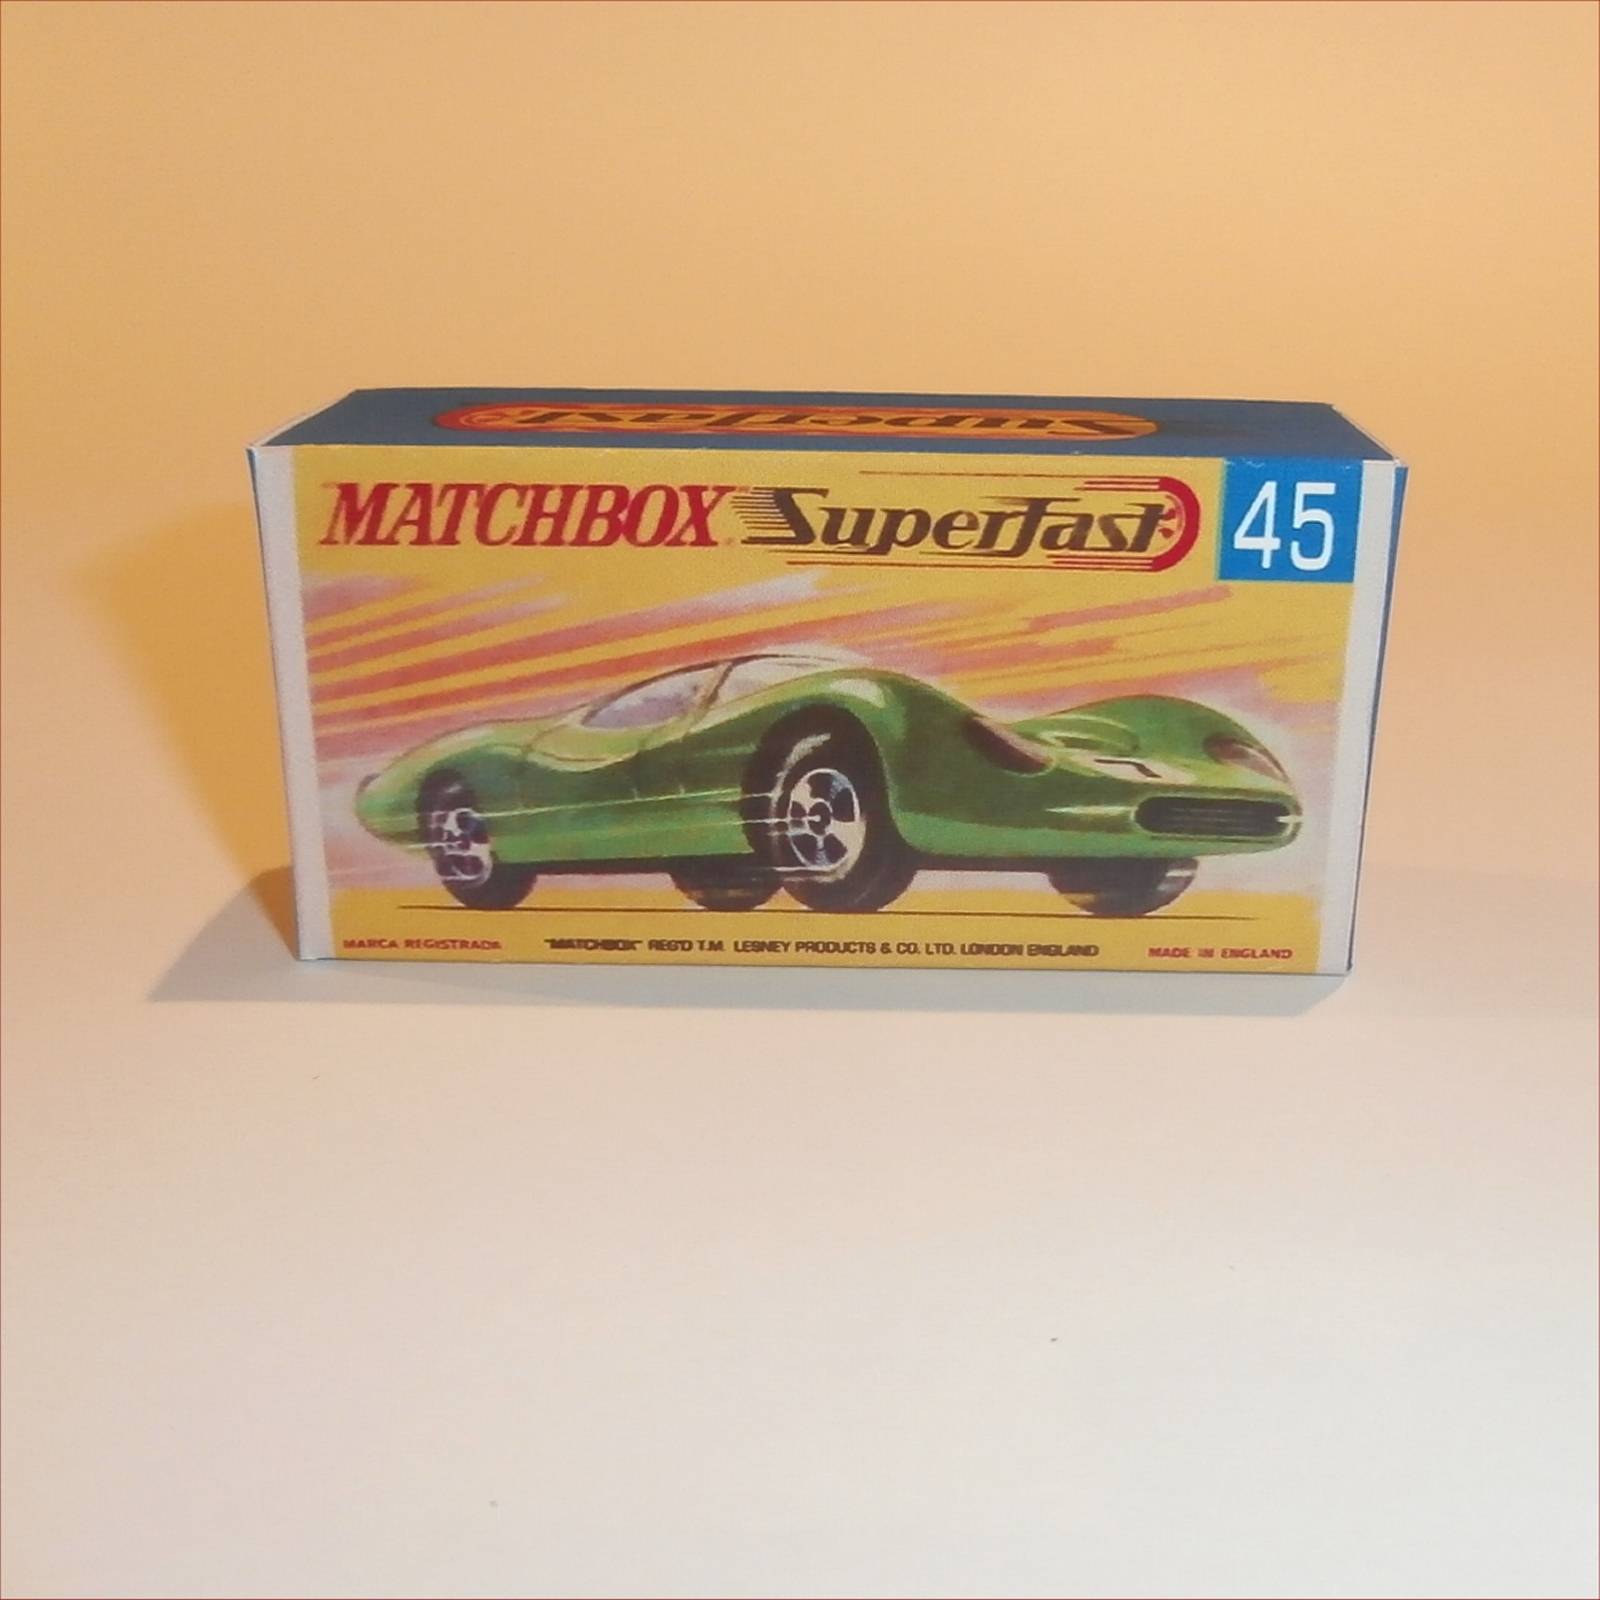 Repro Box Matchbox Superfast Nr.45 Group 6 Ford neuer 